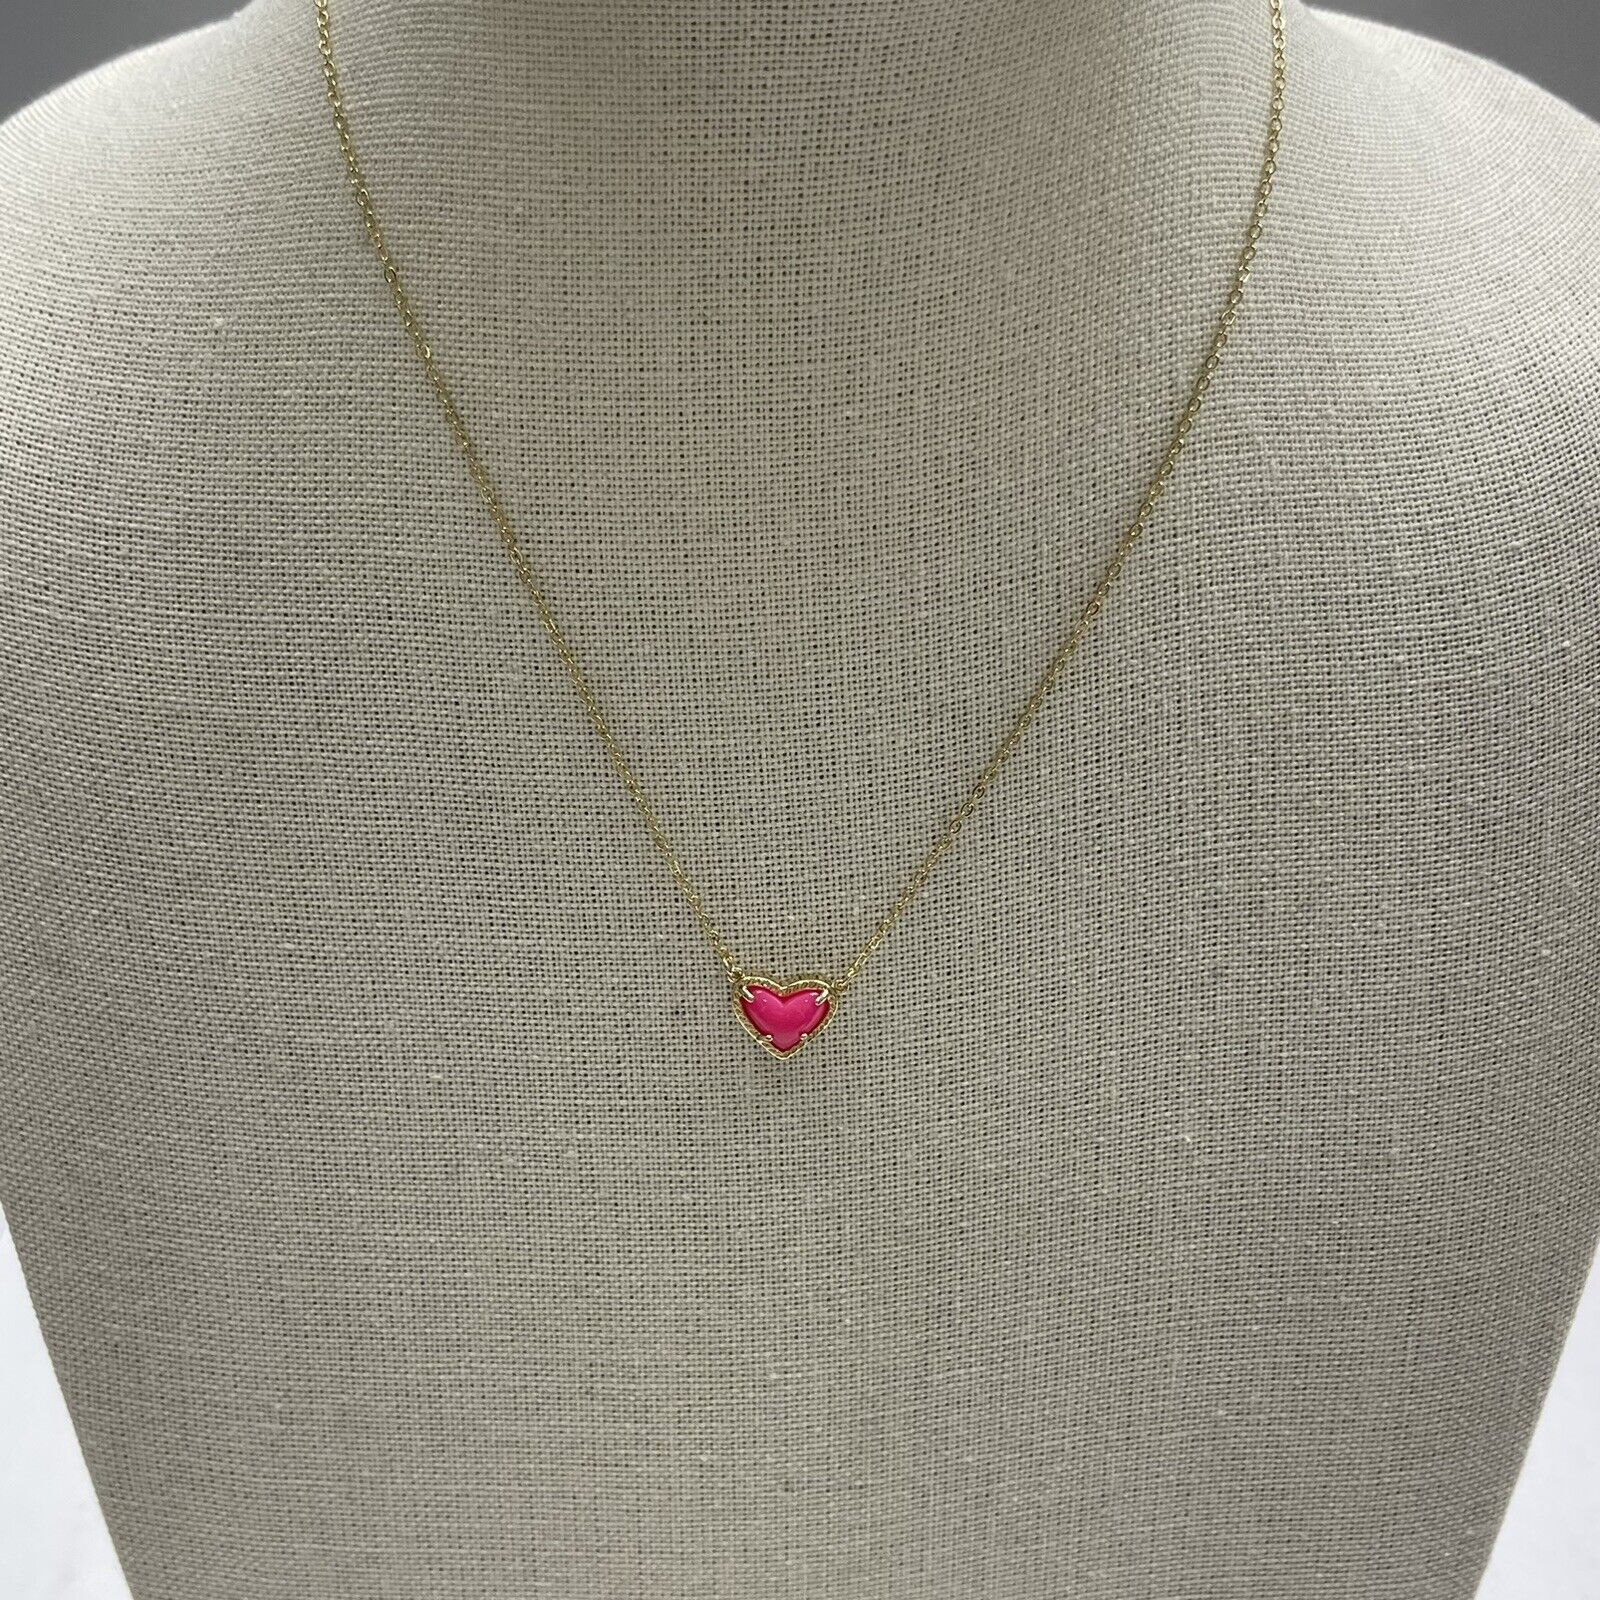 Women’s Gold Chain Pink Pendant Heart Necklace New